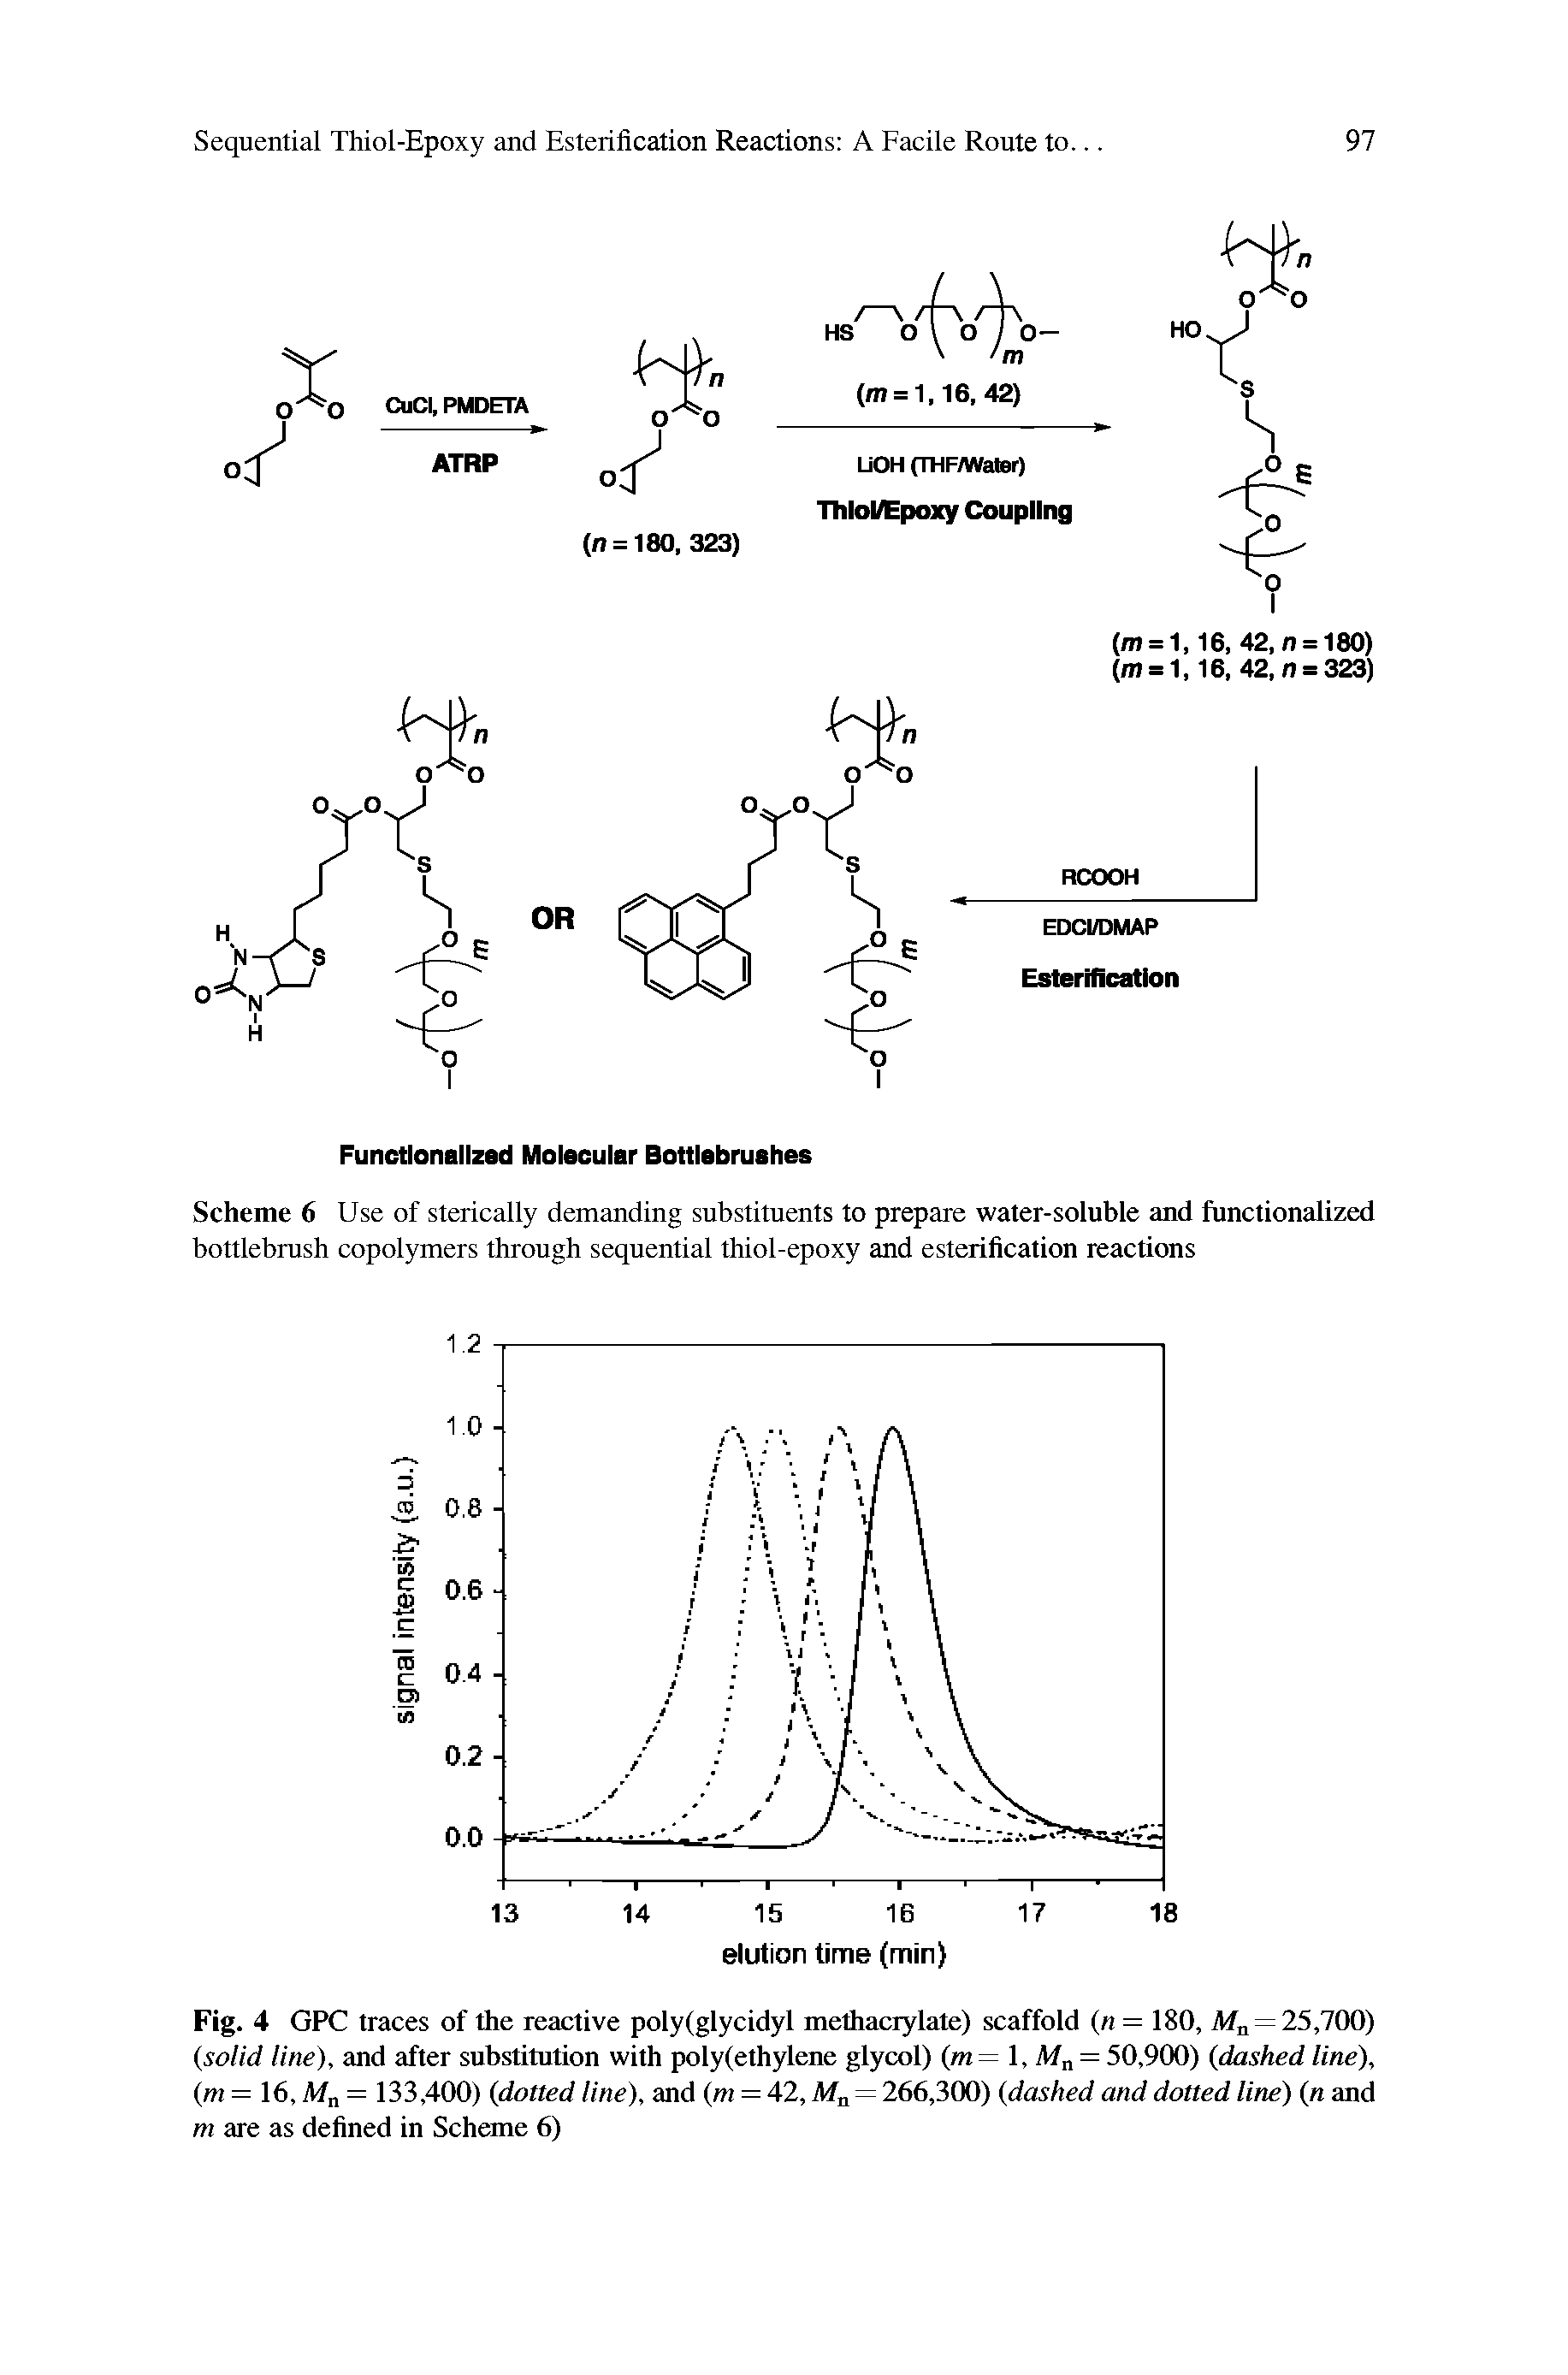 Fig. 4 GPC traces of the reactive polyfglycidyl methacrylate) scaffold (n = 180, Mn= 25,700) solid line), and after substitution with polyfethylene glycol) (m=l,M = 50,900) dashed line), (m = 16, M = 133,400) dotted line), and (m = 42, = 266,300) dashed and dotted line) n and...